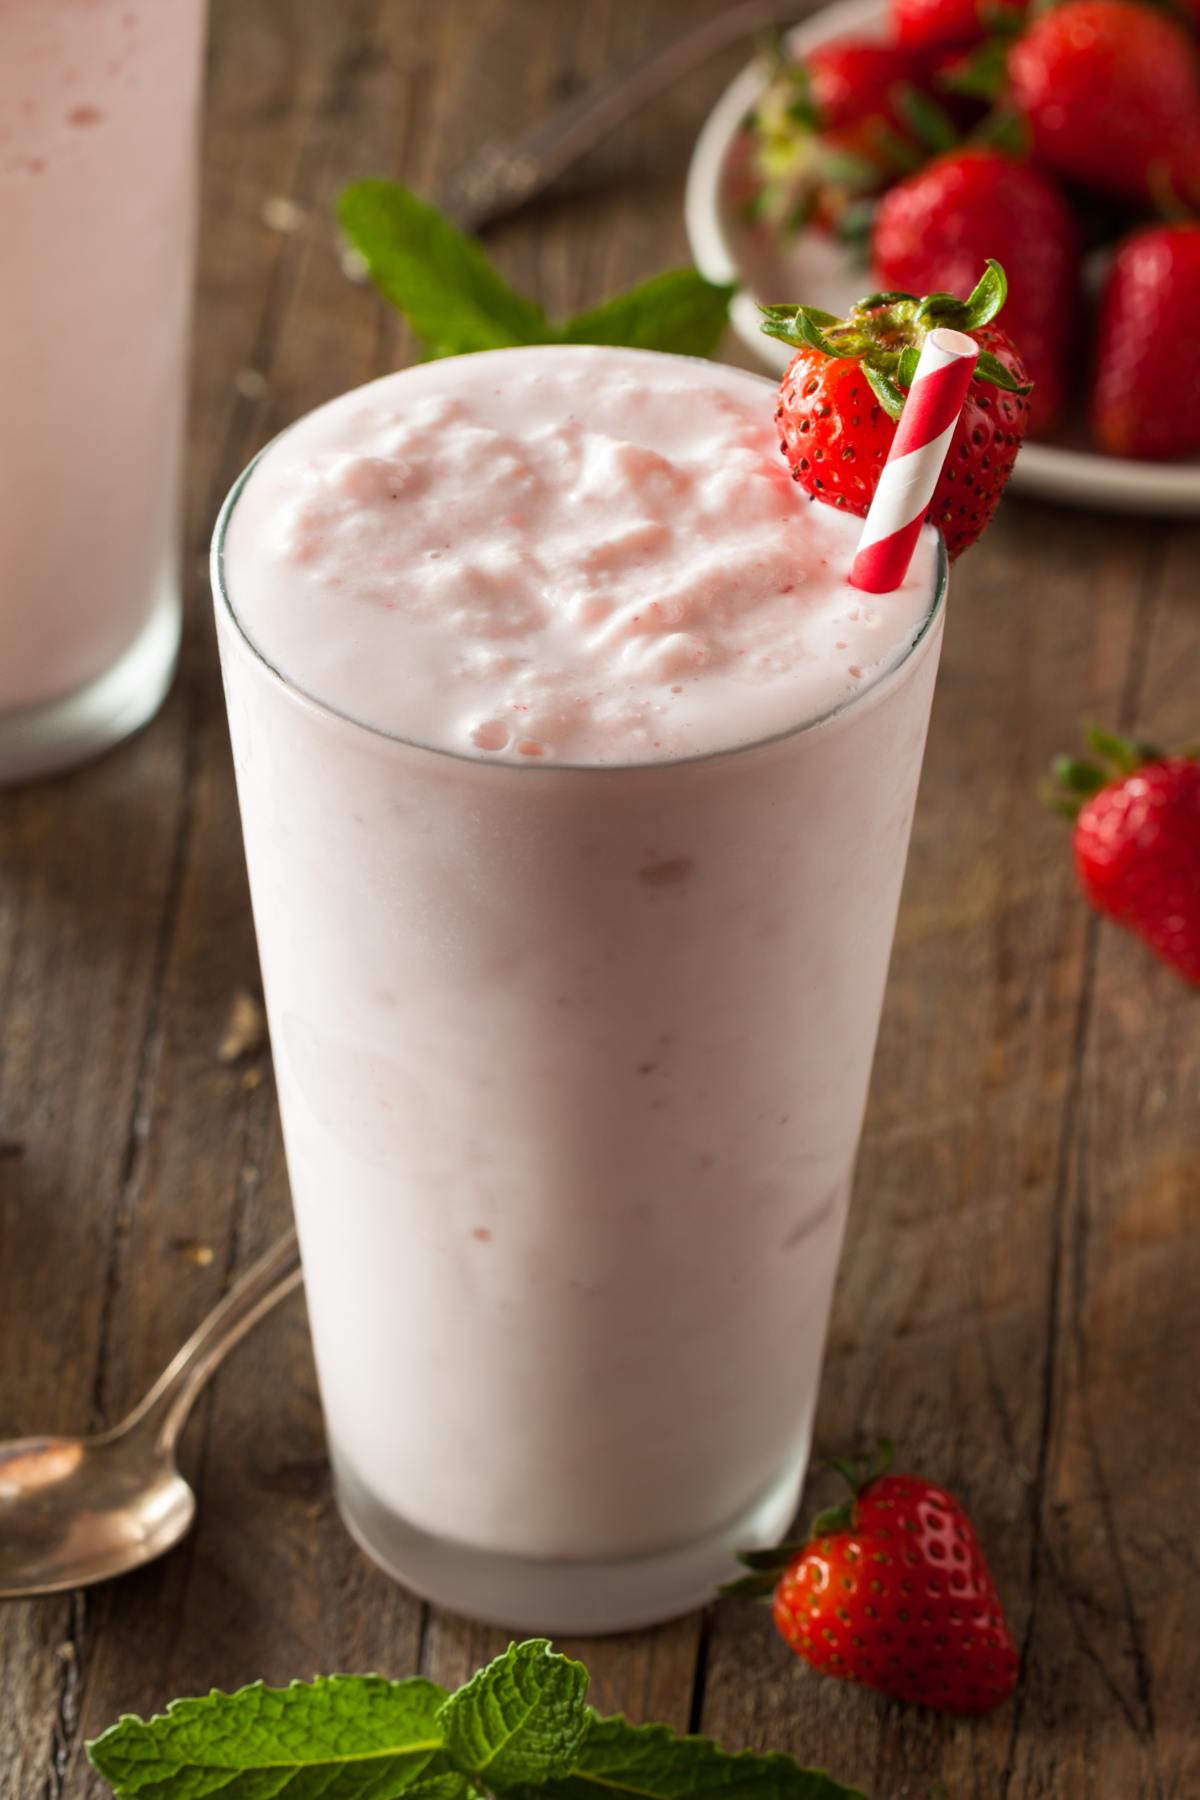 Who doesn’t like McDonald’s Milkshake? Available in vanilla, strawberry and chocolate, these shakes are delicious as a standalone treat or as a decadent dessert after polishing off a cheeseburger or chicken sandwich. Whether you’re 9 or 90, that first sip is sure to put a smile on your face.